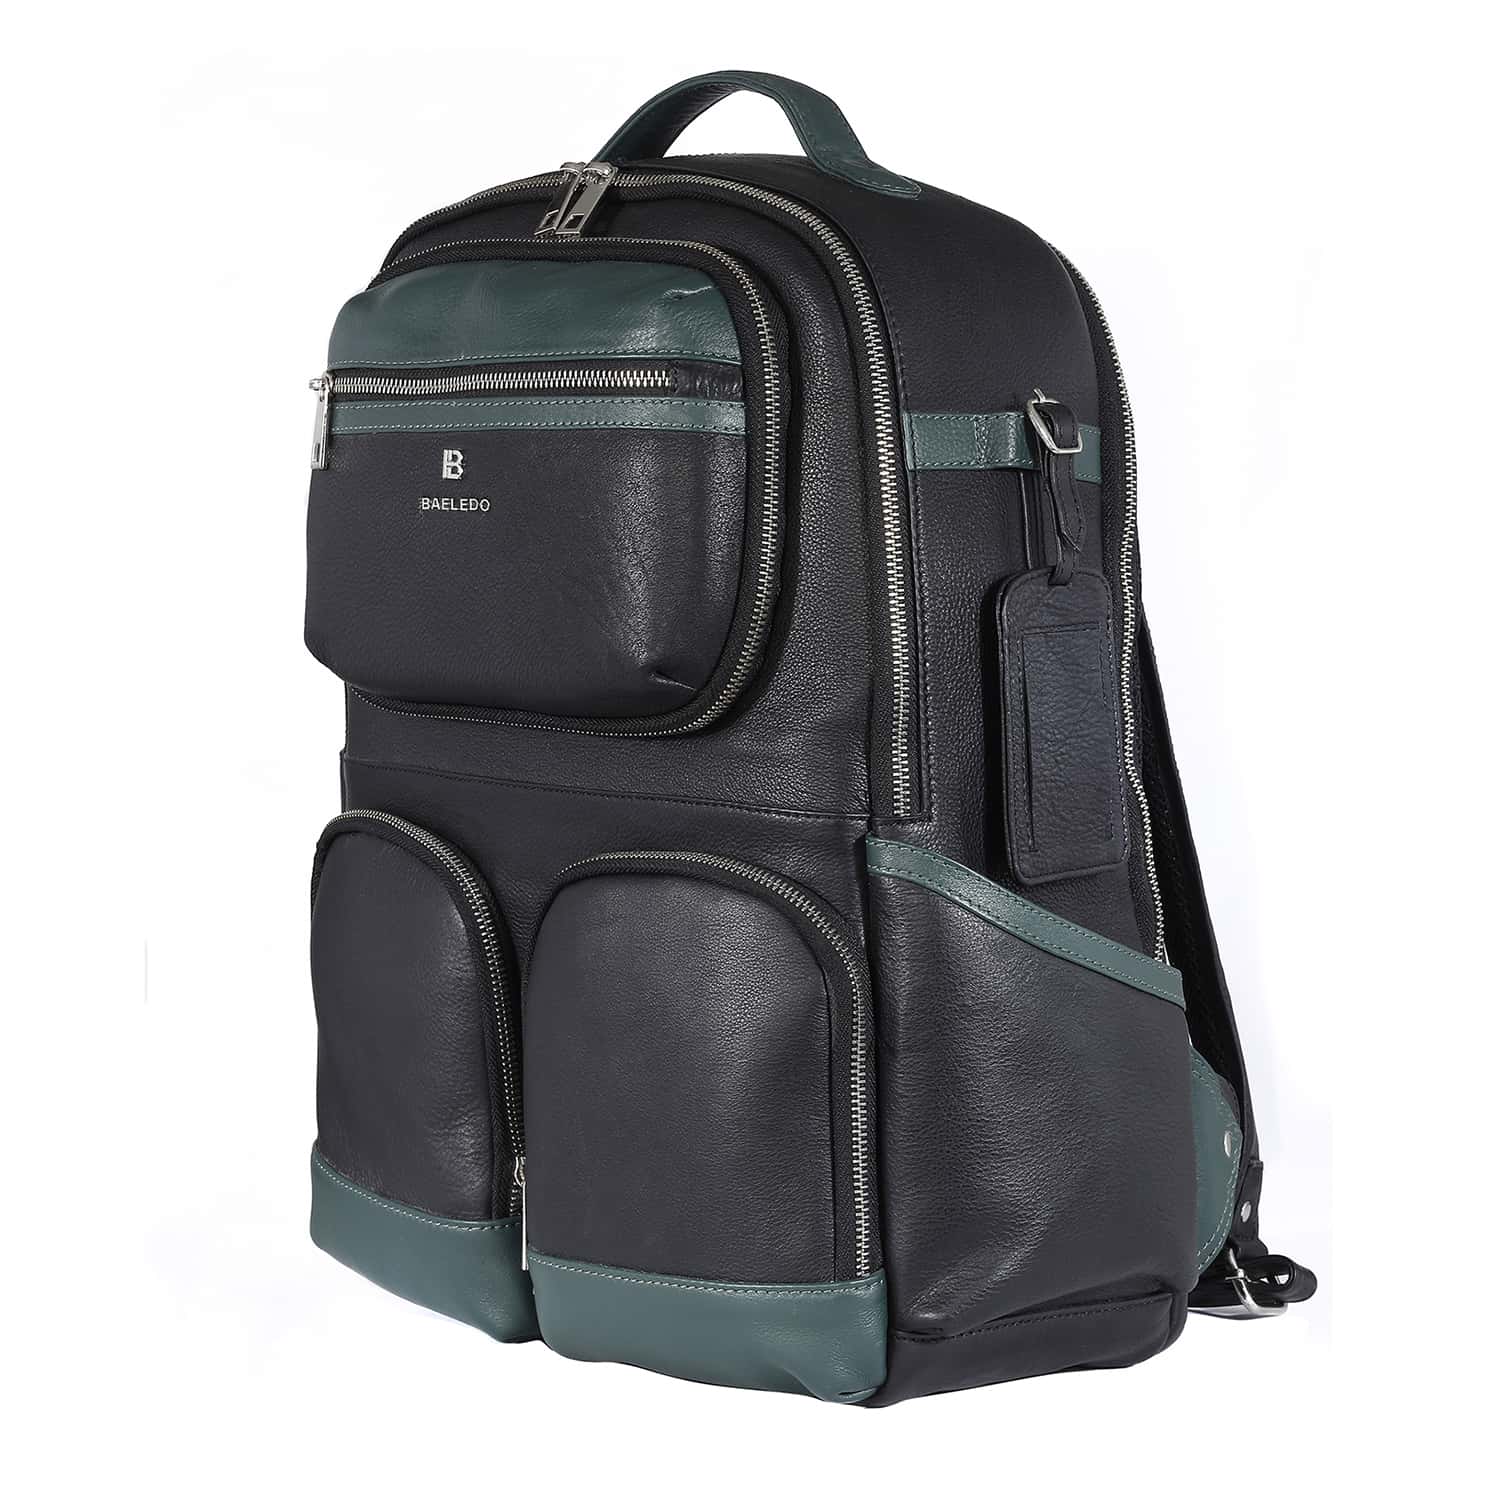 VISMIINTREND Vegan Leather Casual Backpack Purse Green Height 11.8 inches  Online in India, Buy at Best Price from Firstcry.com - 12089416